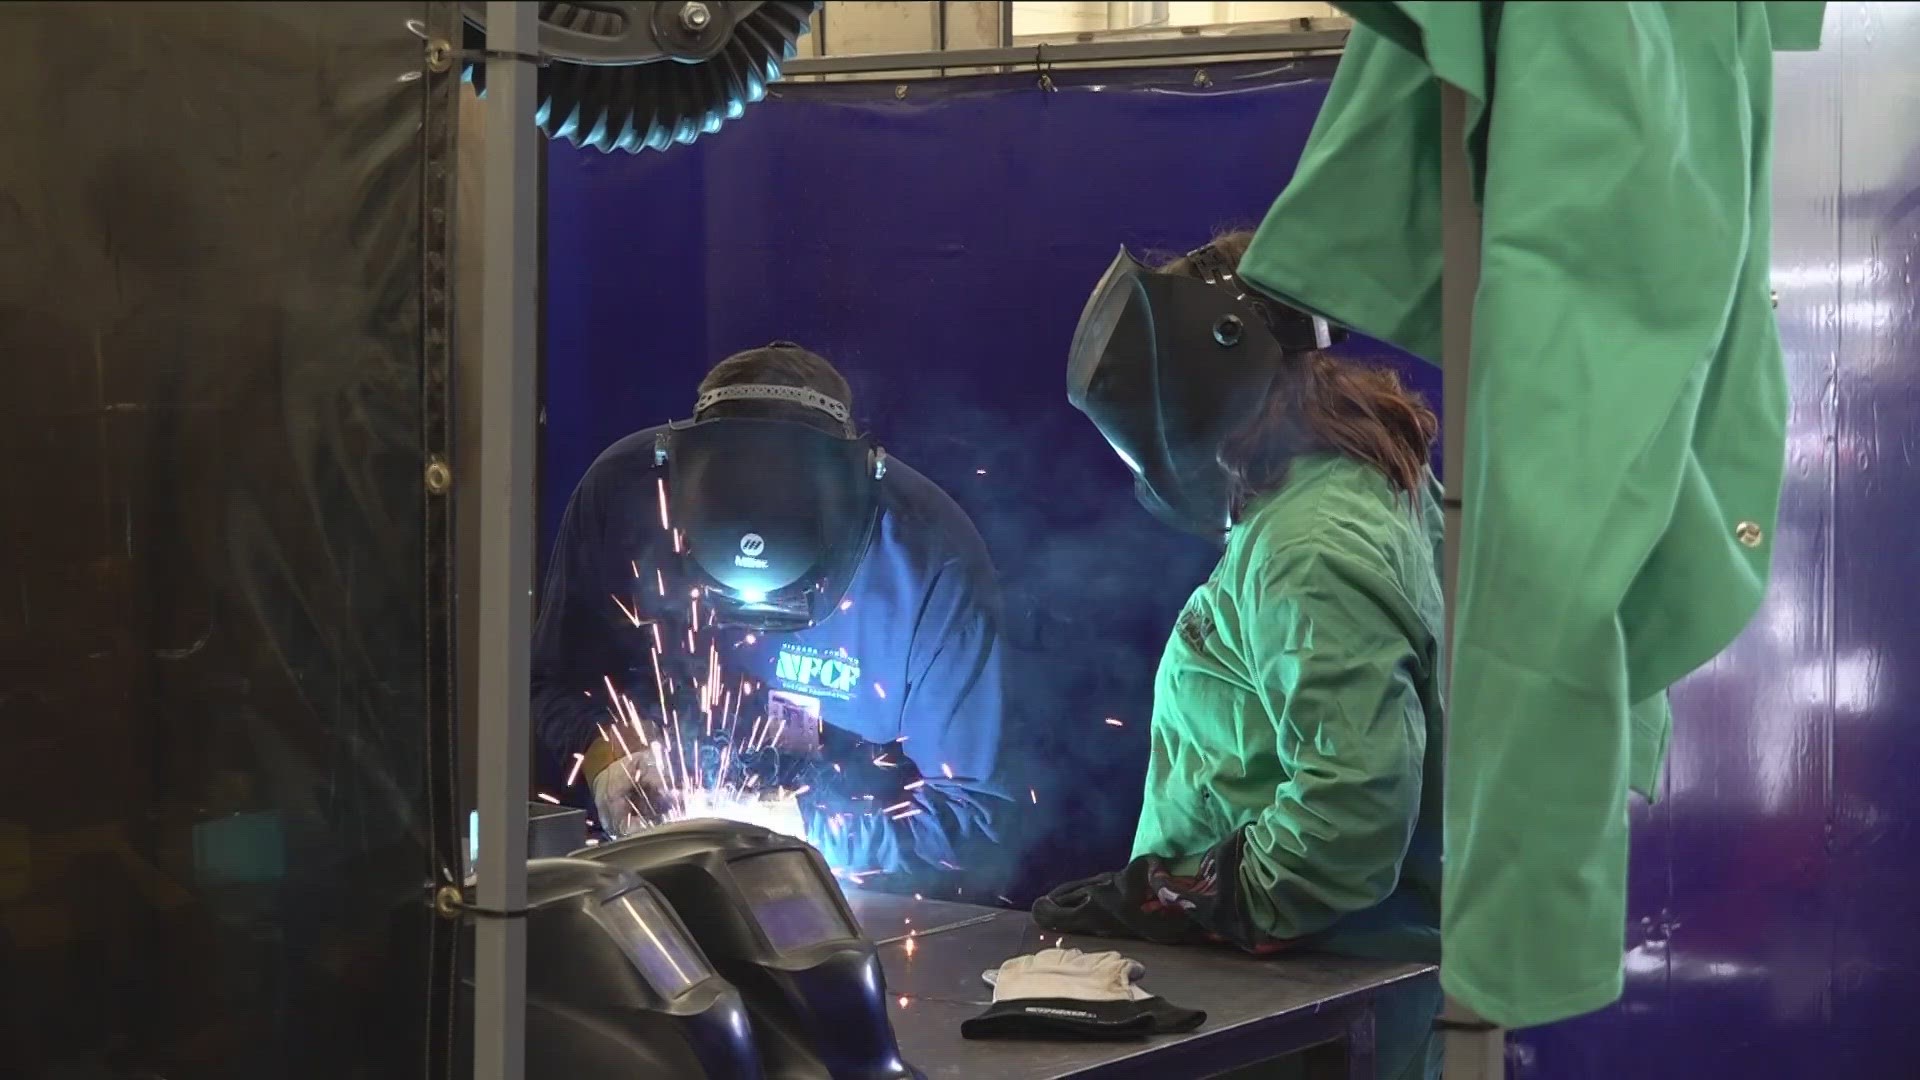 Alden High School is partnering with professionals in manufacturing and the trades to show students what job opportunities are out there after high school.